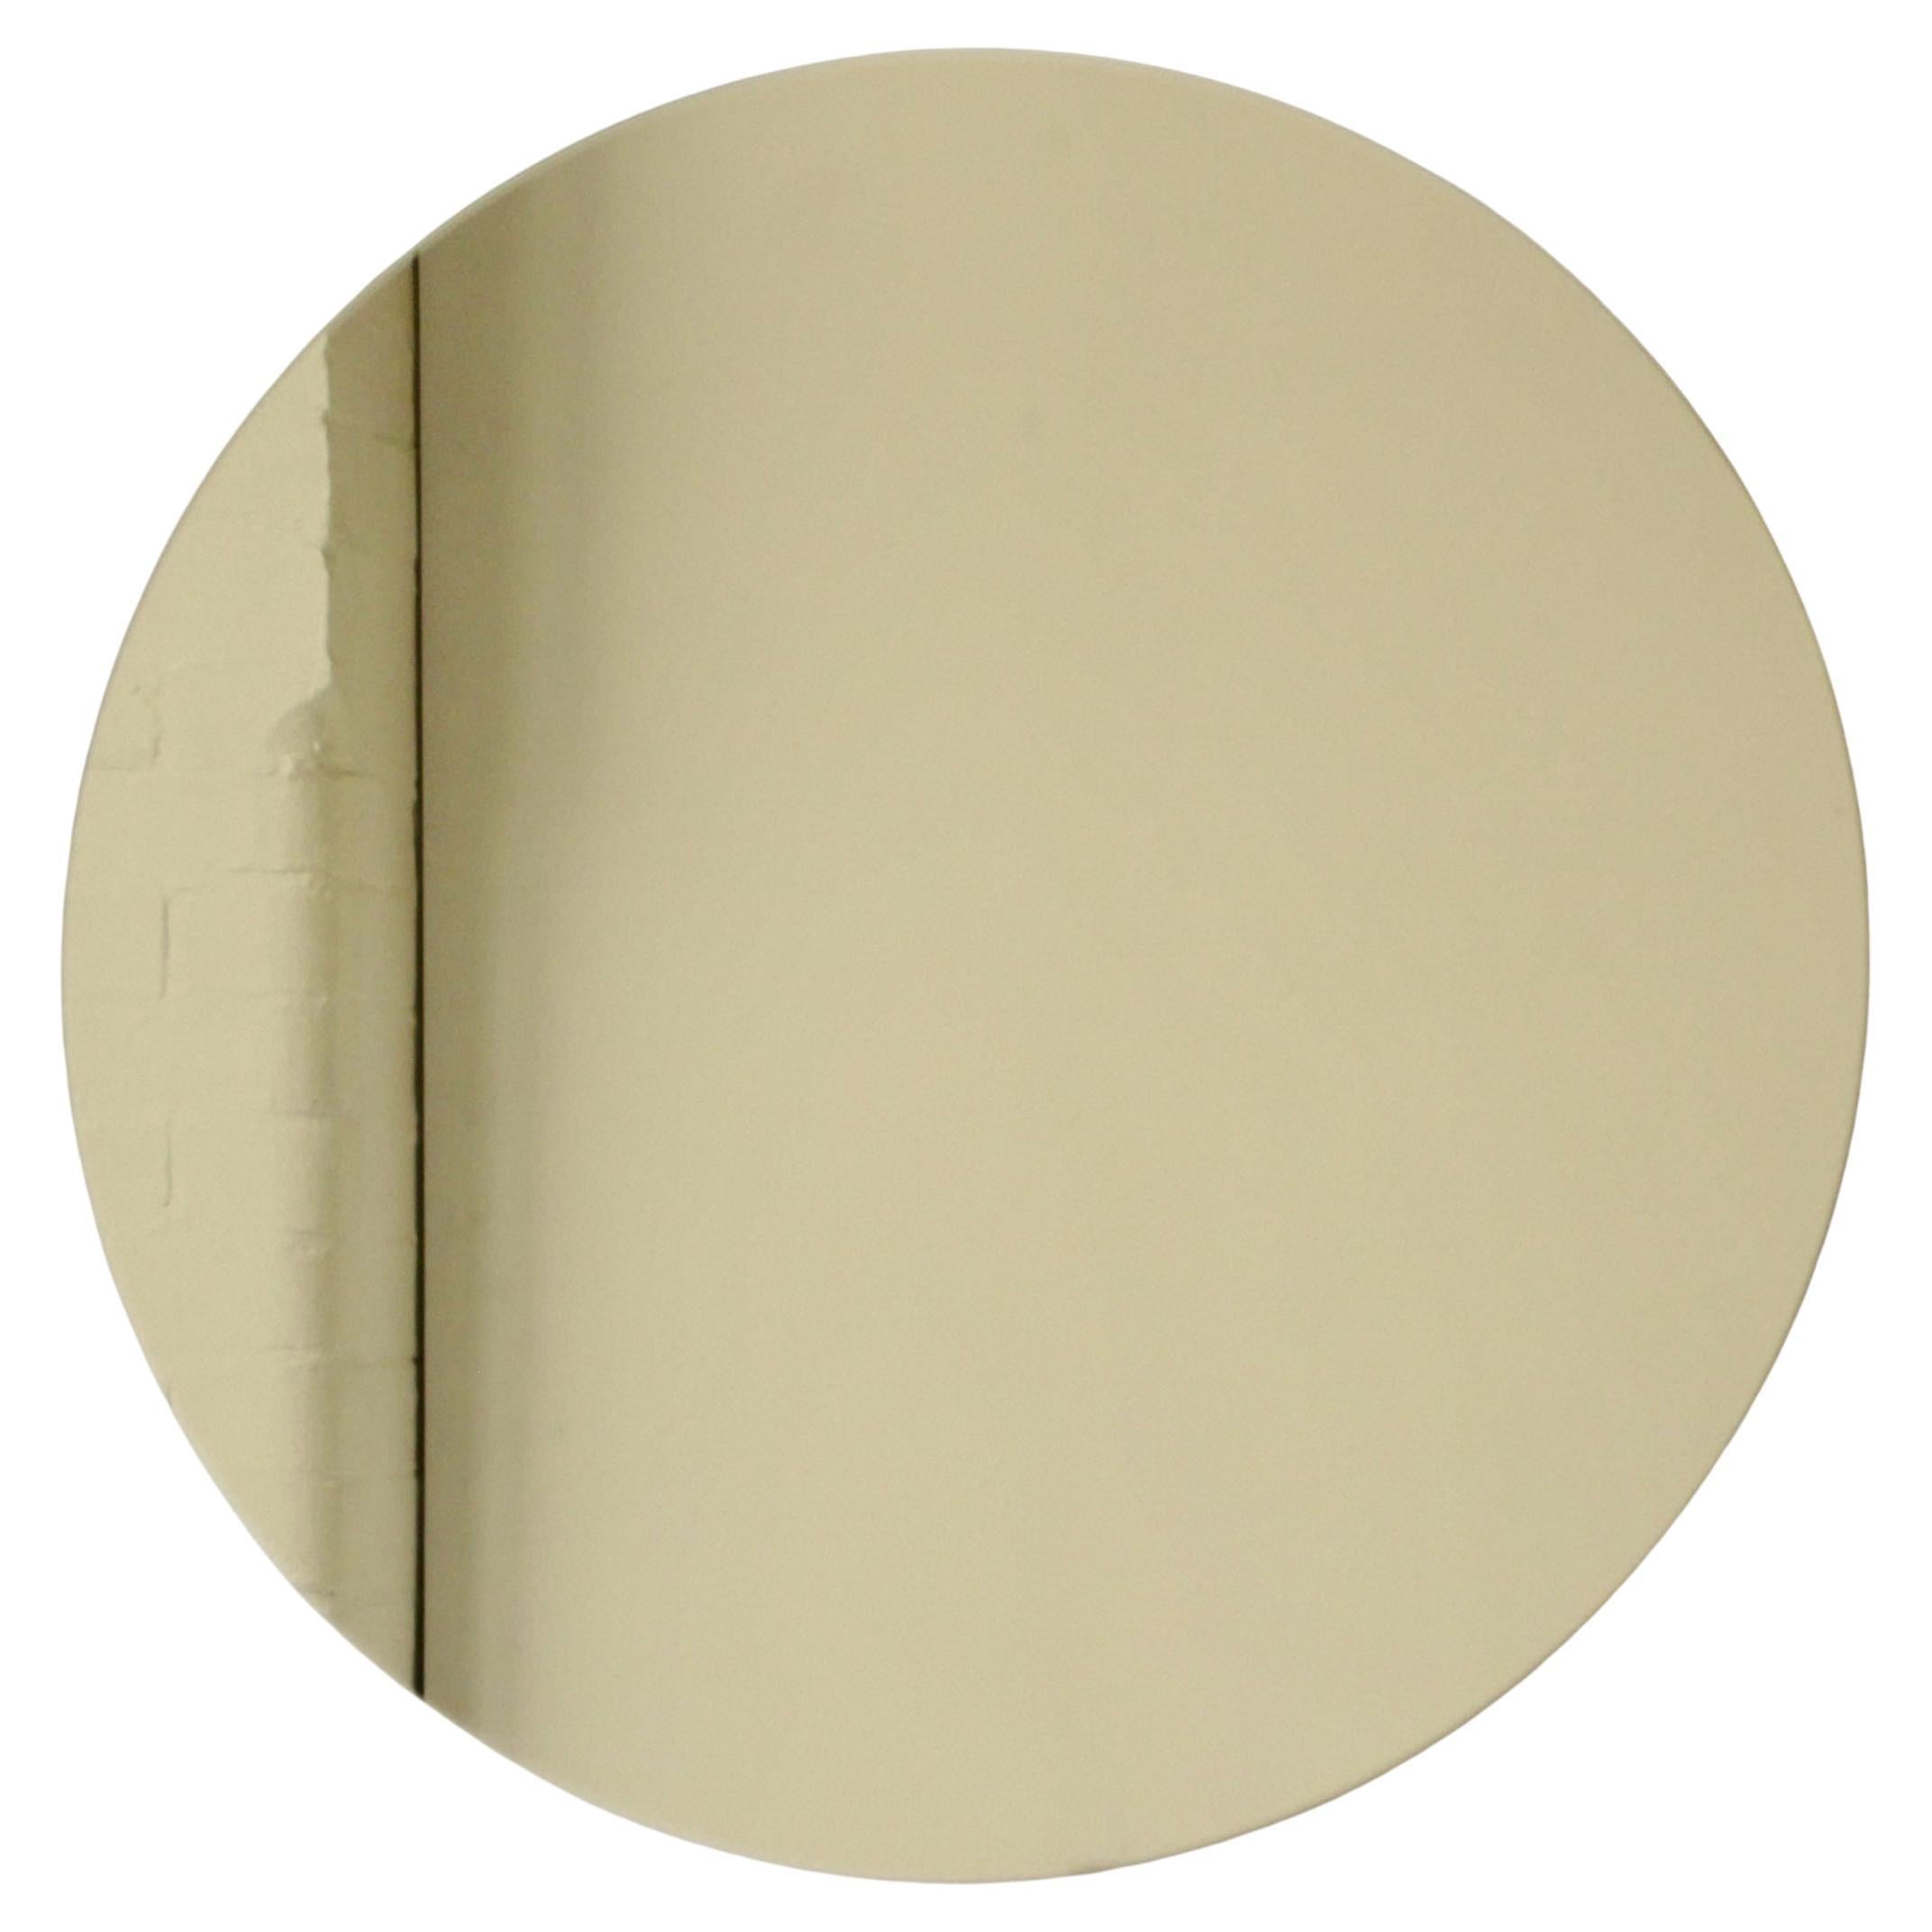 Orbis Gold Tinted Round Frameless Contemporary Mirror with a Floating Effect, XL